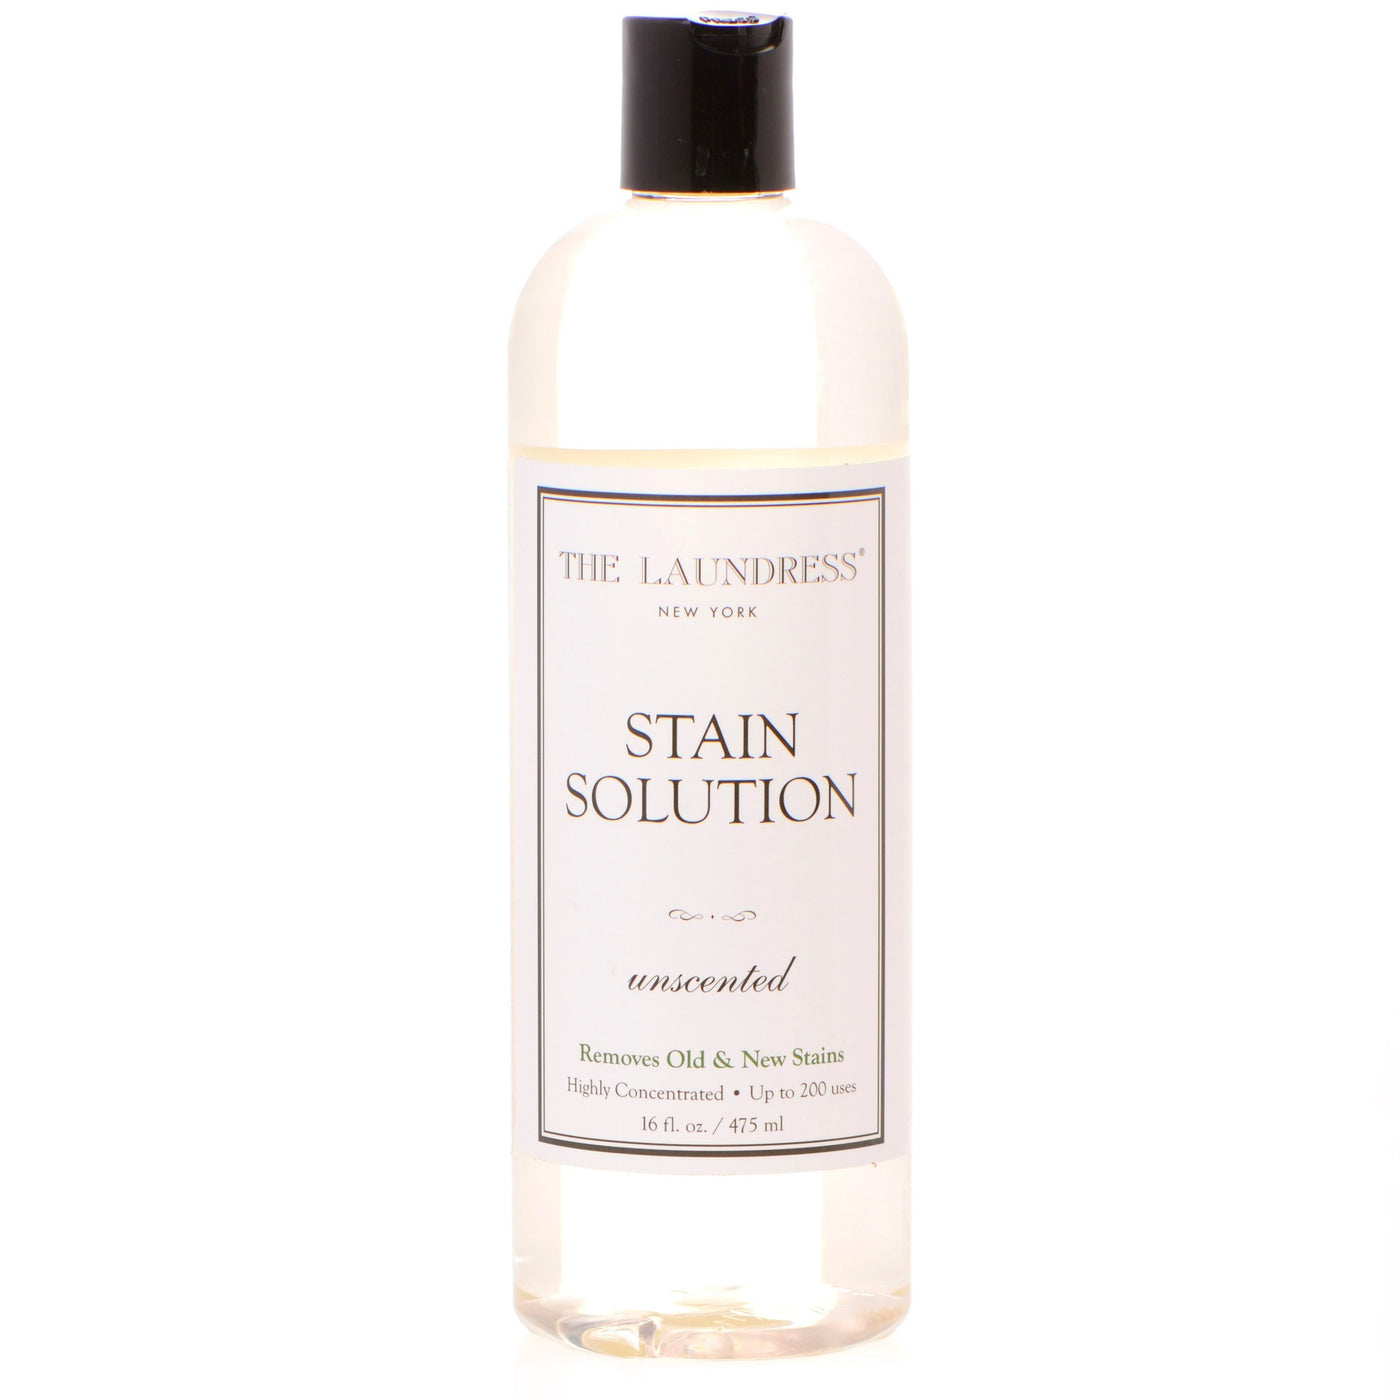 stain solution, laundress, laundry, stain remover, stain guard, easycare, laundering